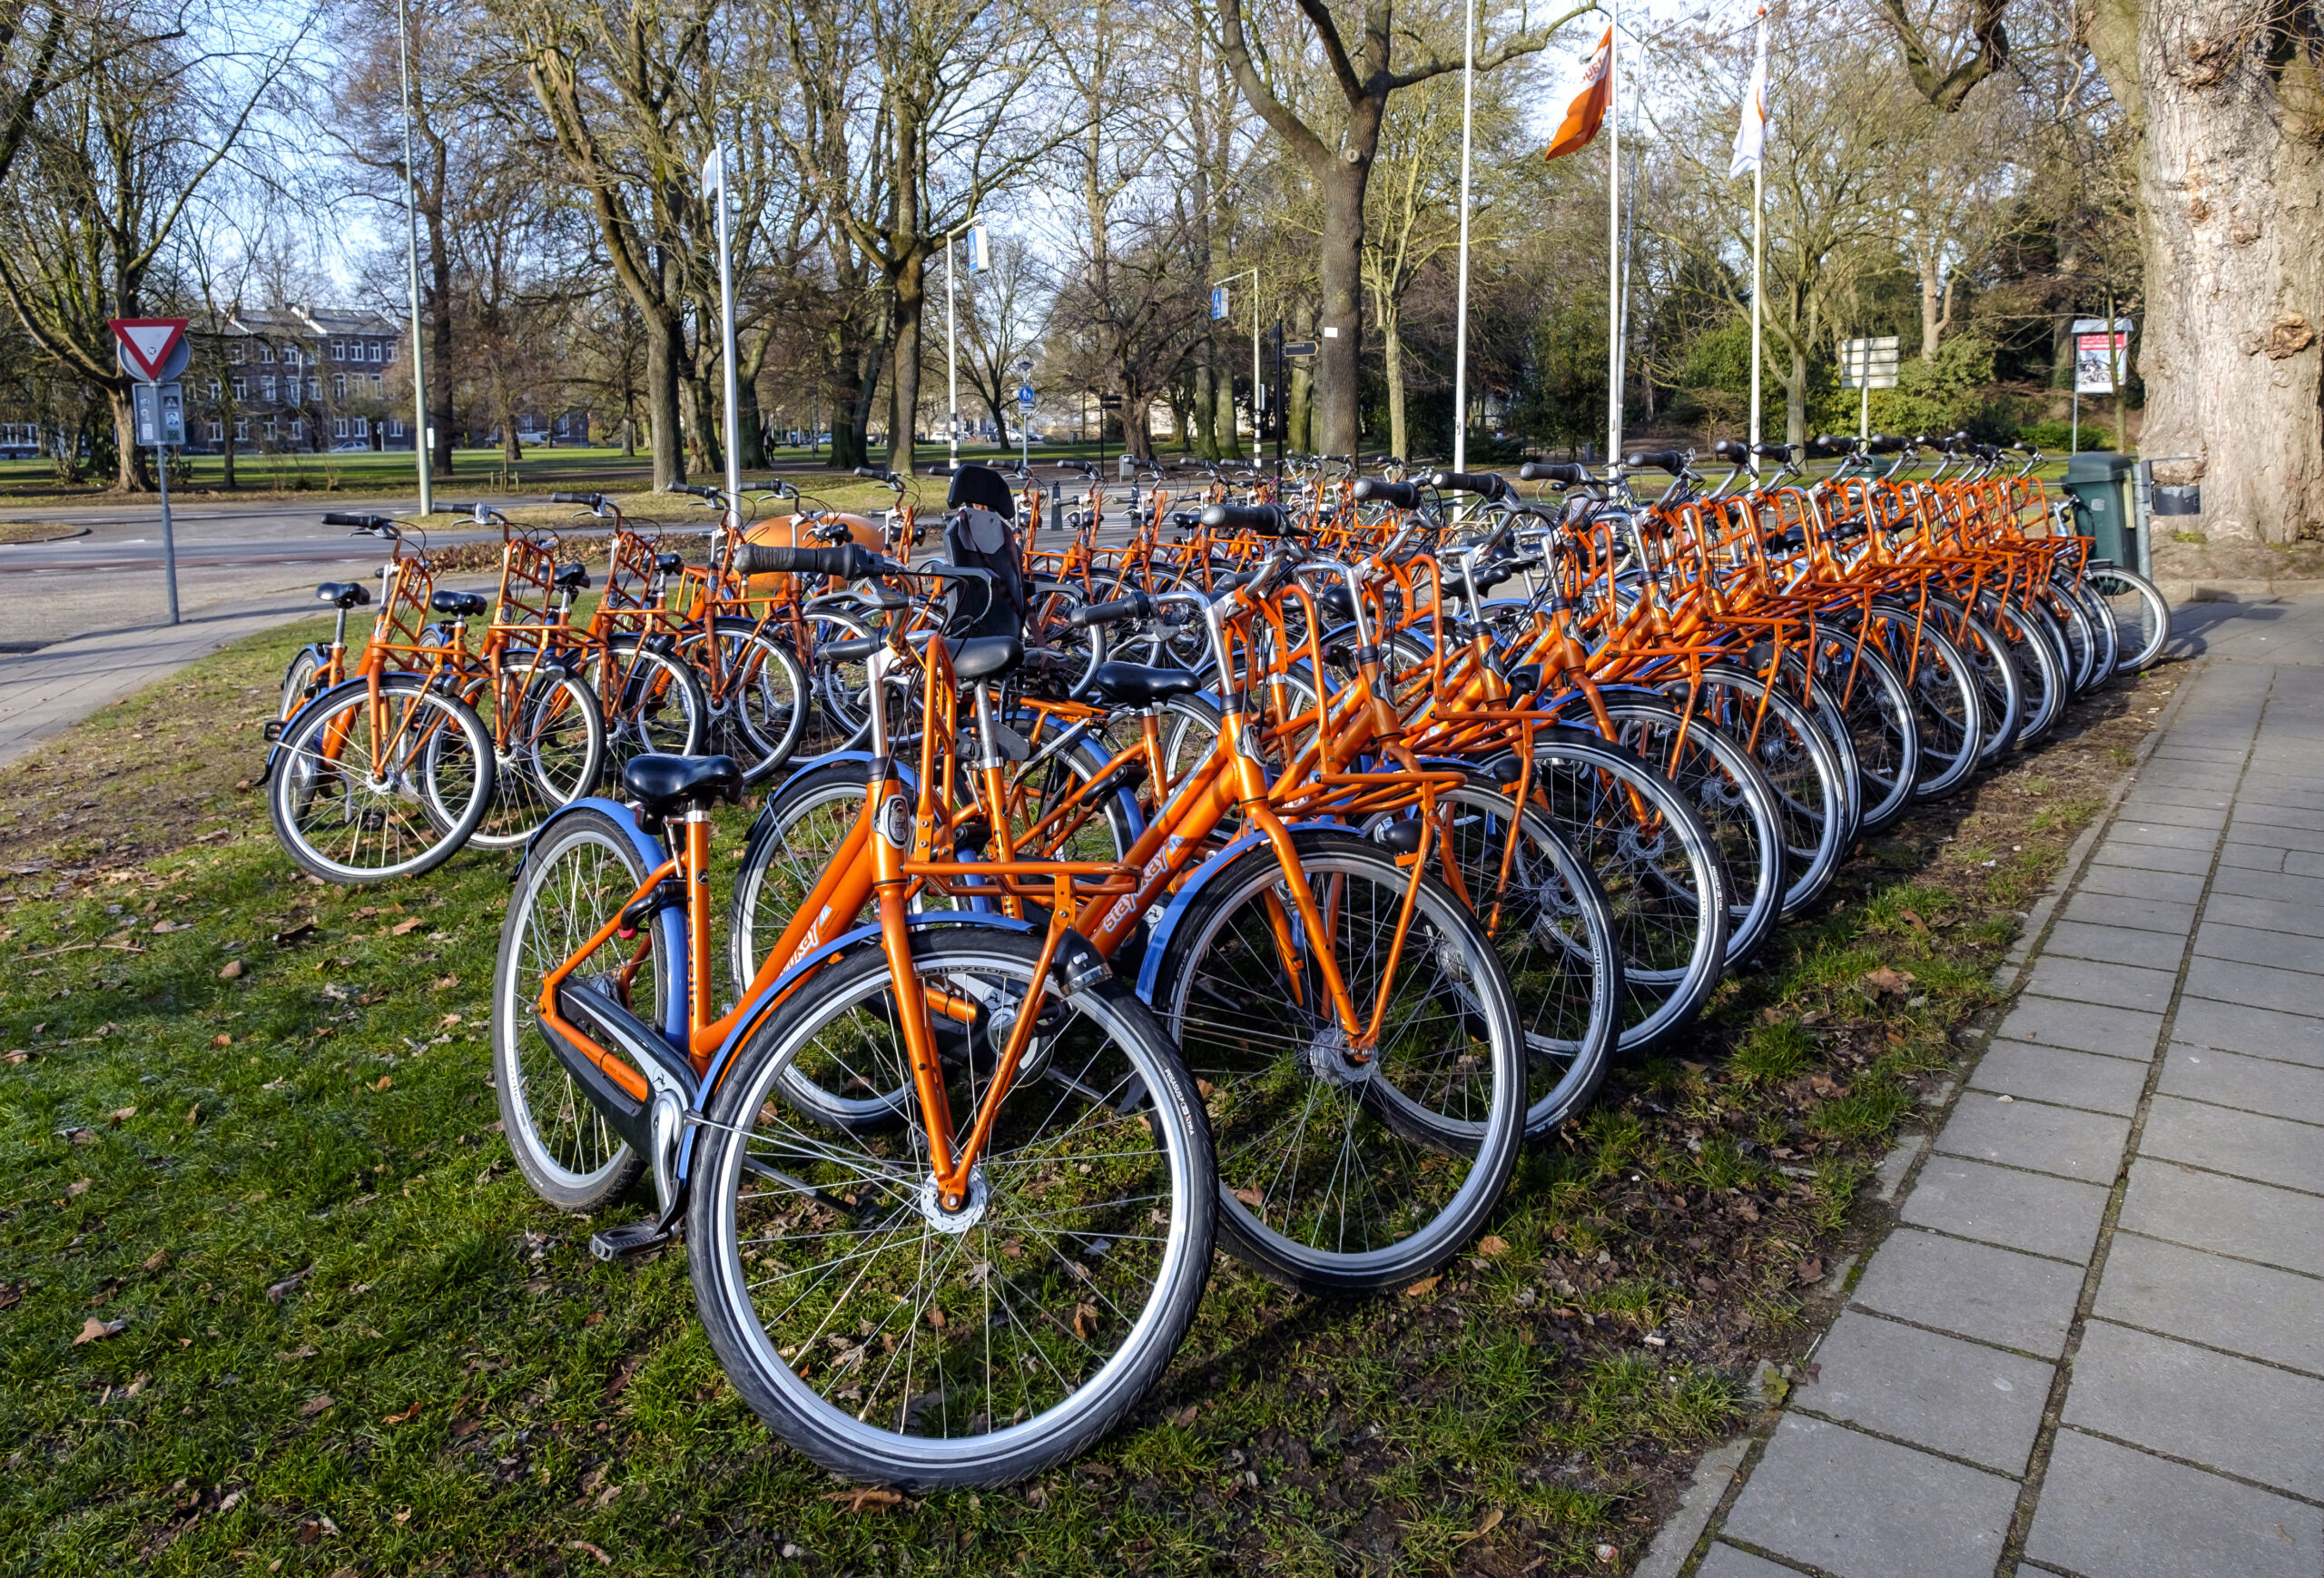 Maastricht, Netherlands, January 2017. Large number of identical orange and blue bicycles, neatly parked on the grass.